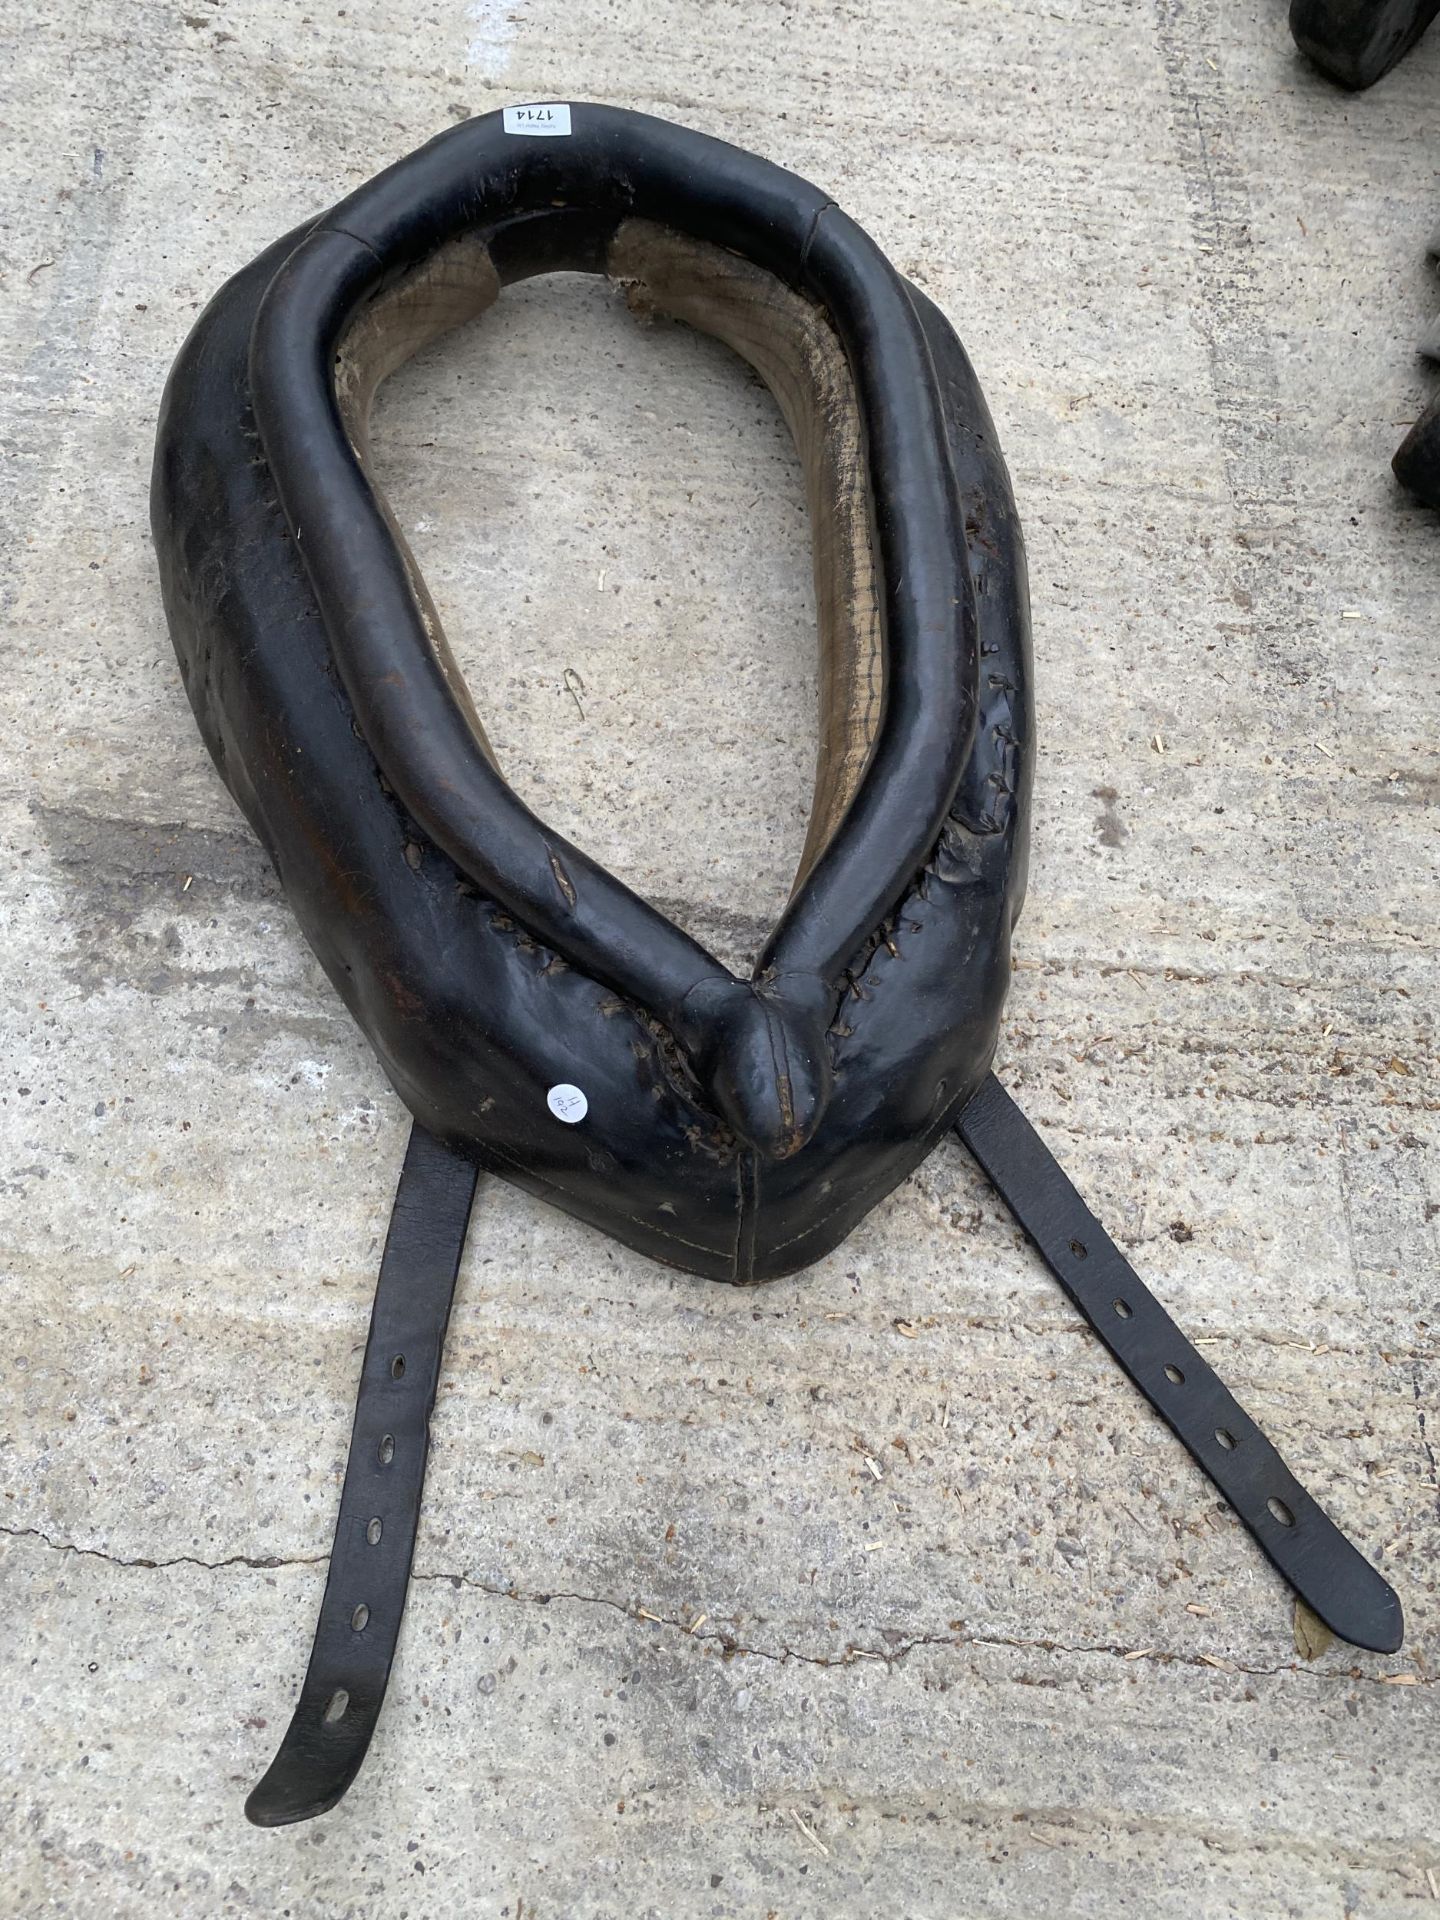 A VINTAGE LEATHER HEAVY HORSE HARNESS COLLAR - Image 2 of 3